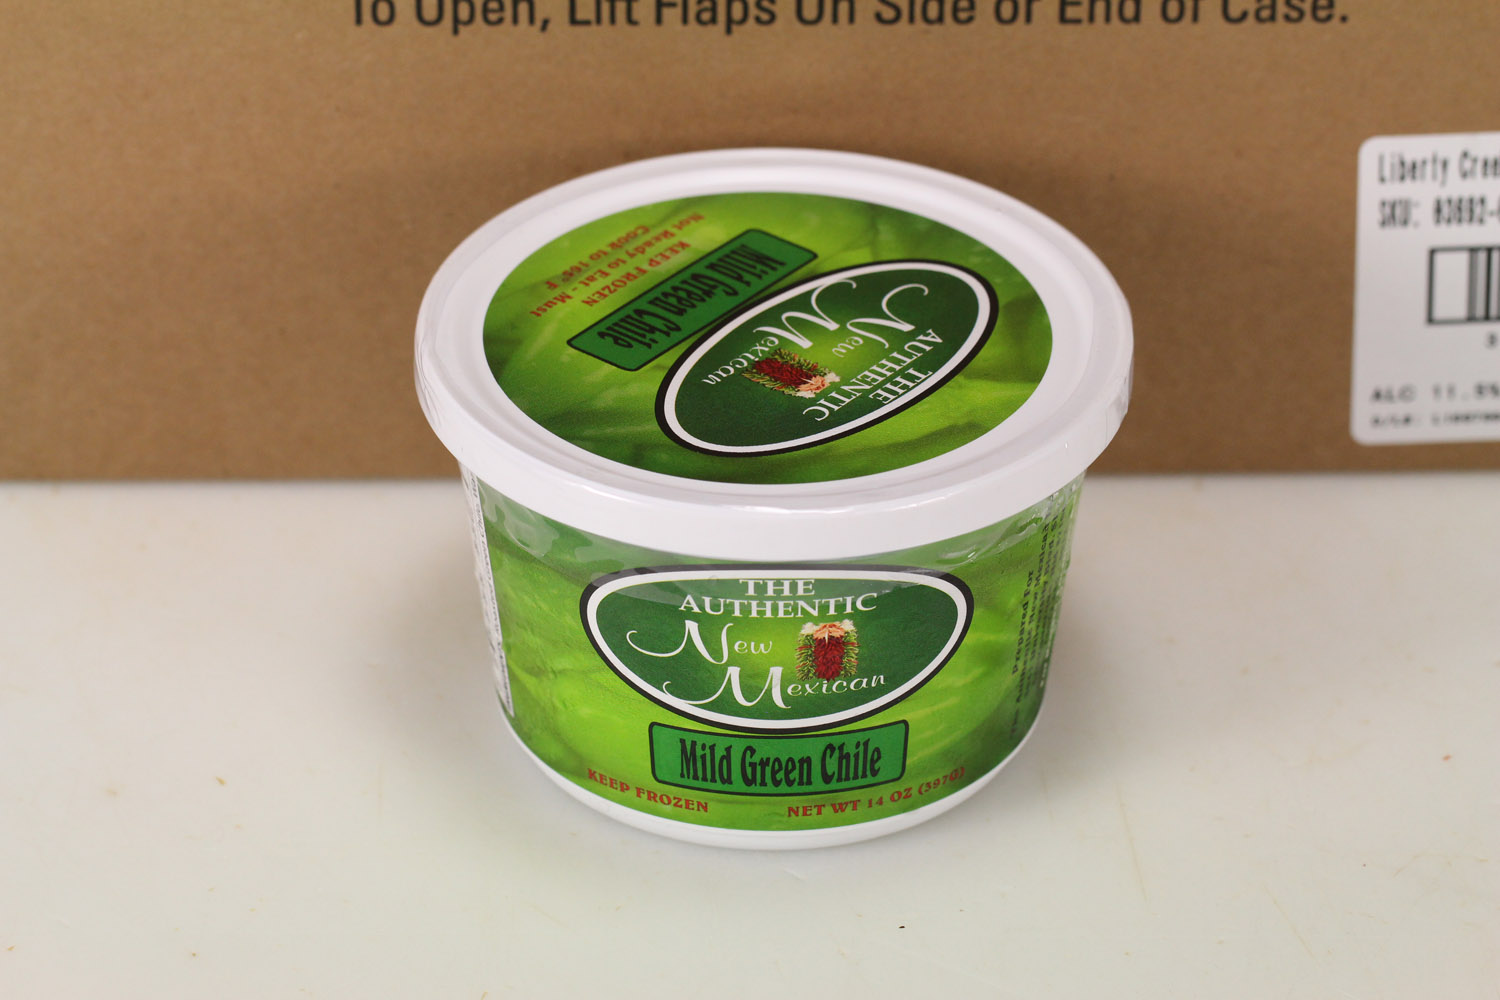 This image icon displays the Purdy's Quality Meats New Mexico Albuquerque Uncooked Green Chili Hot .875 Lbs image